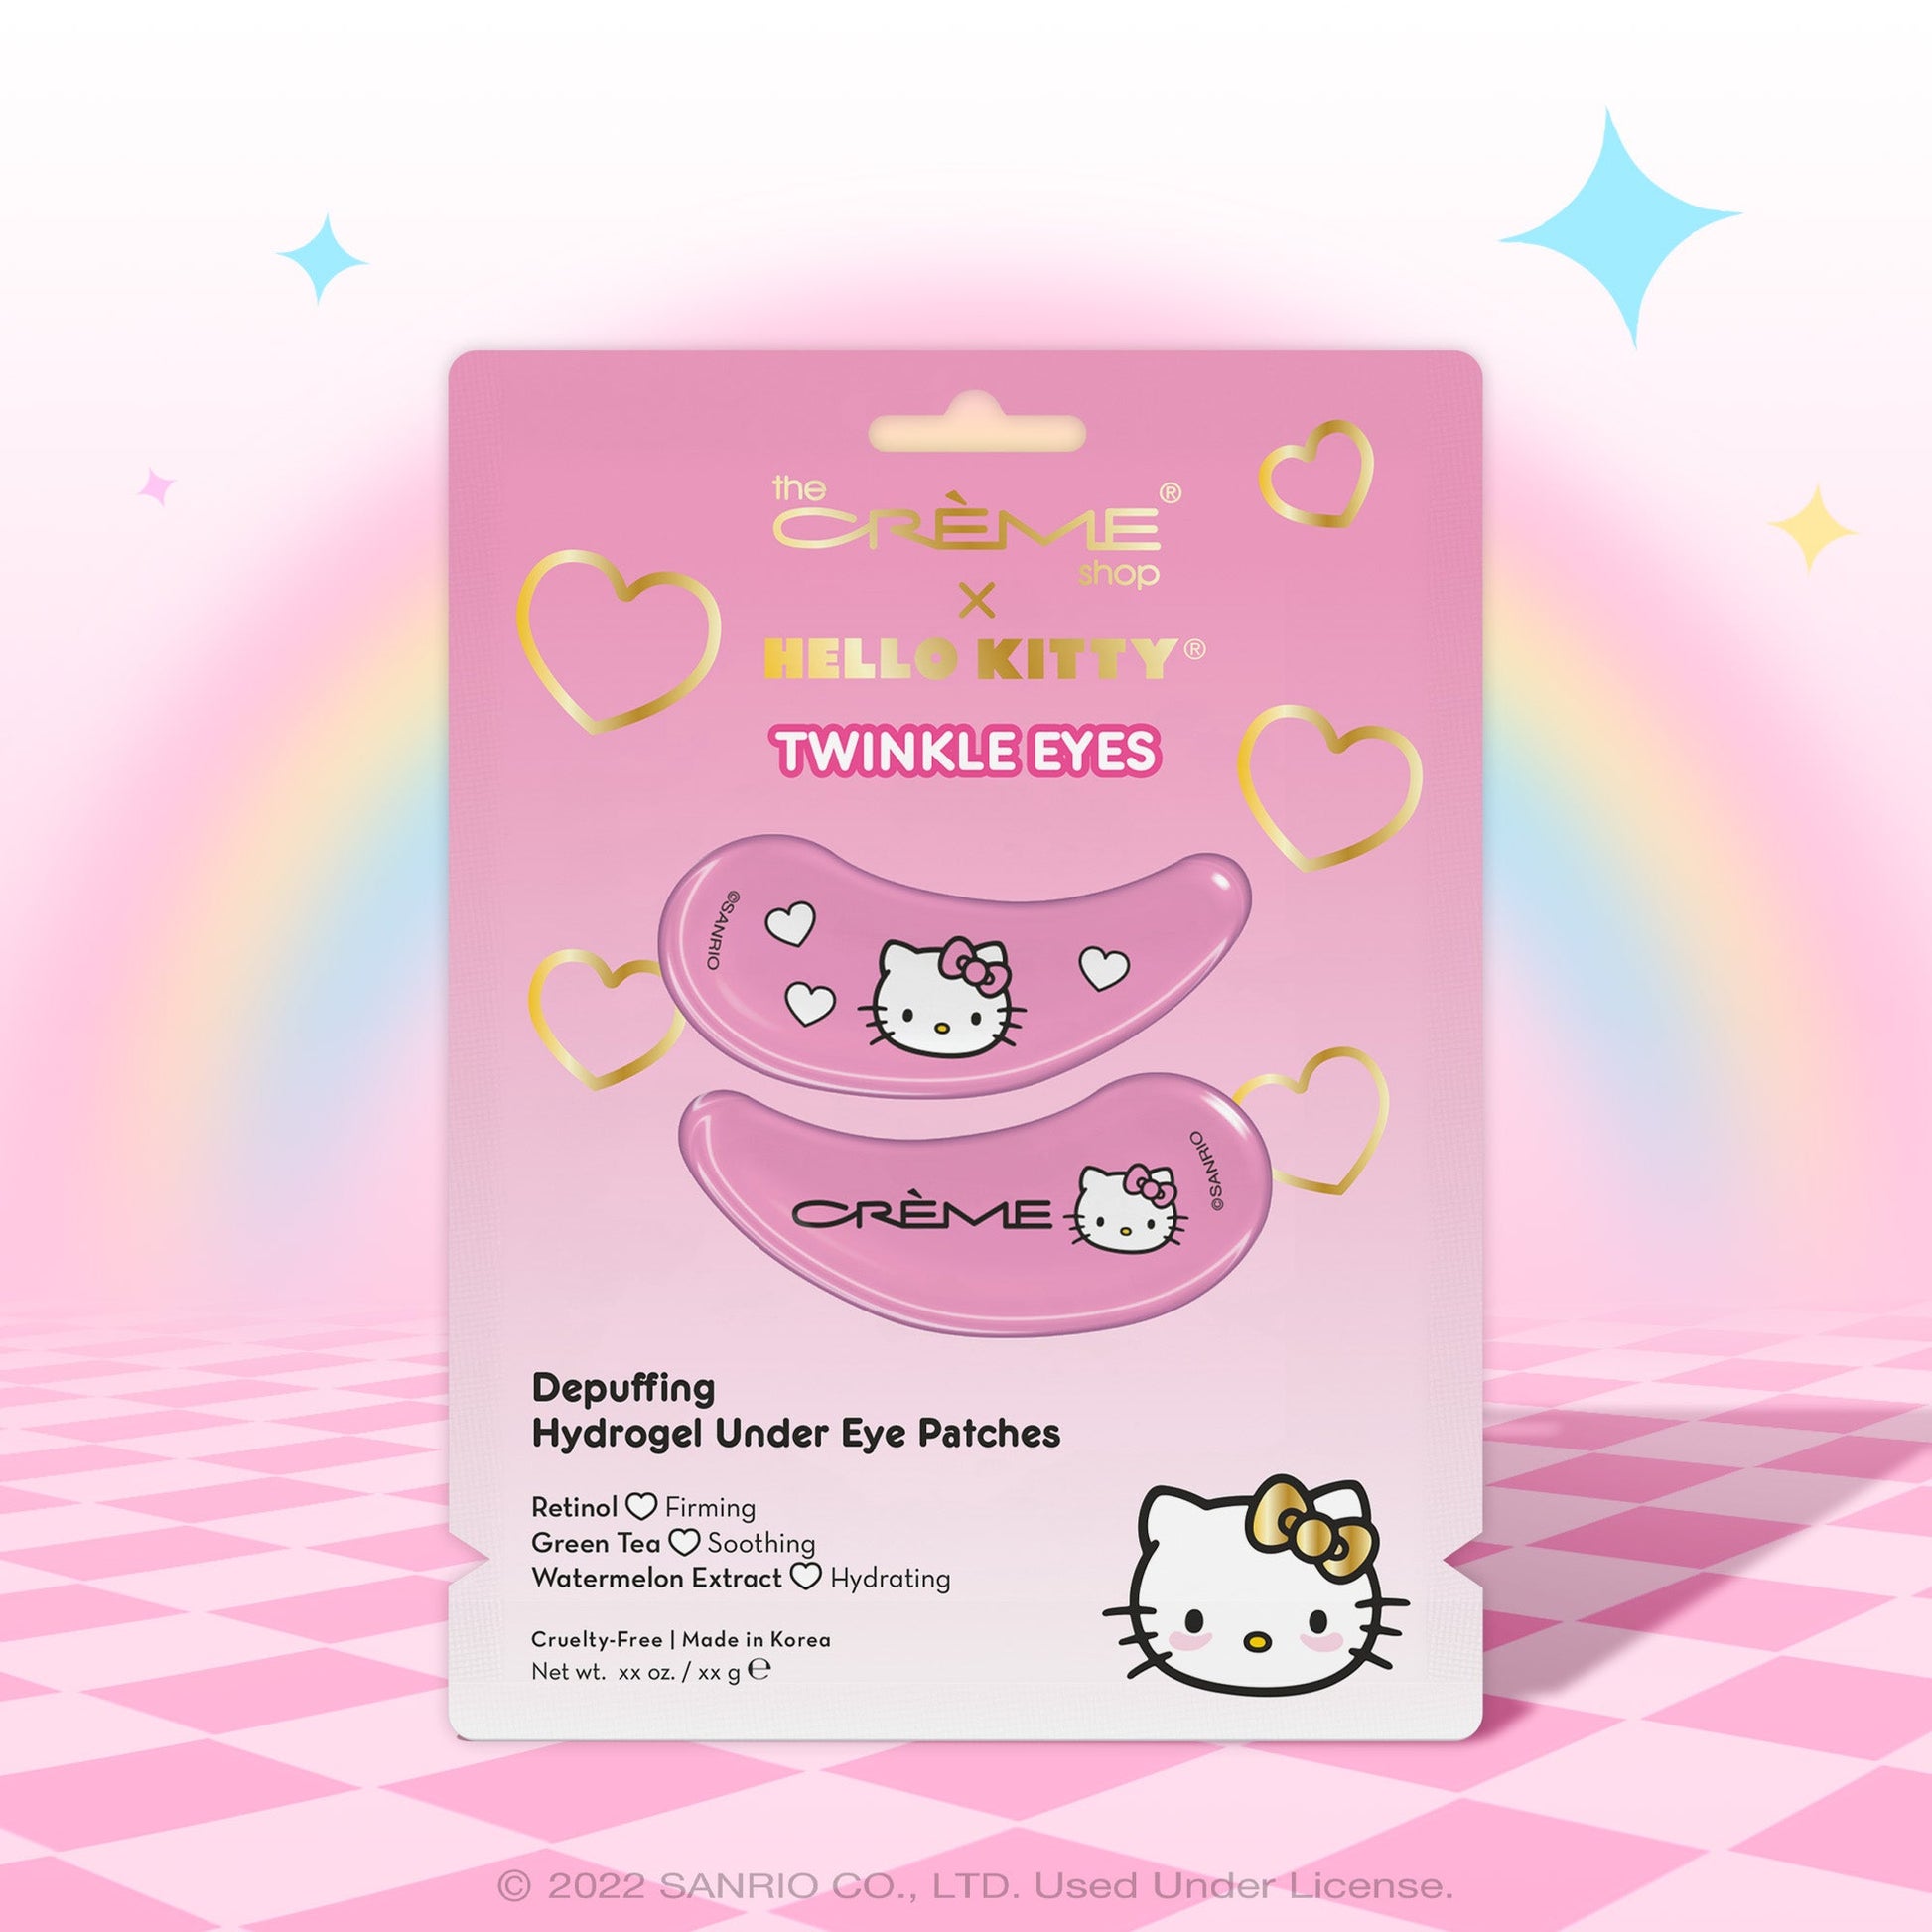 The Crème Shop x Hello Kitty Twinkle Eyes Depuffing Hydrogel Under Eye Patches Skin Care The Crème Shop 